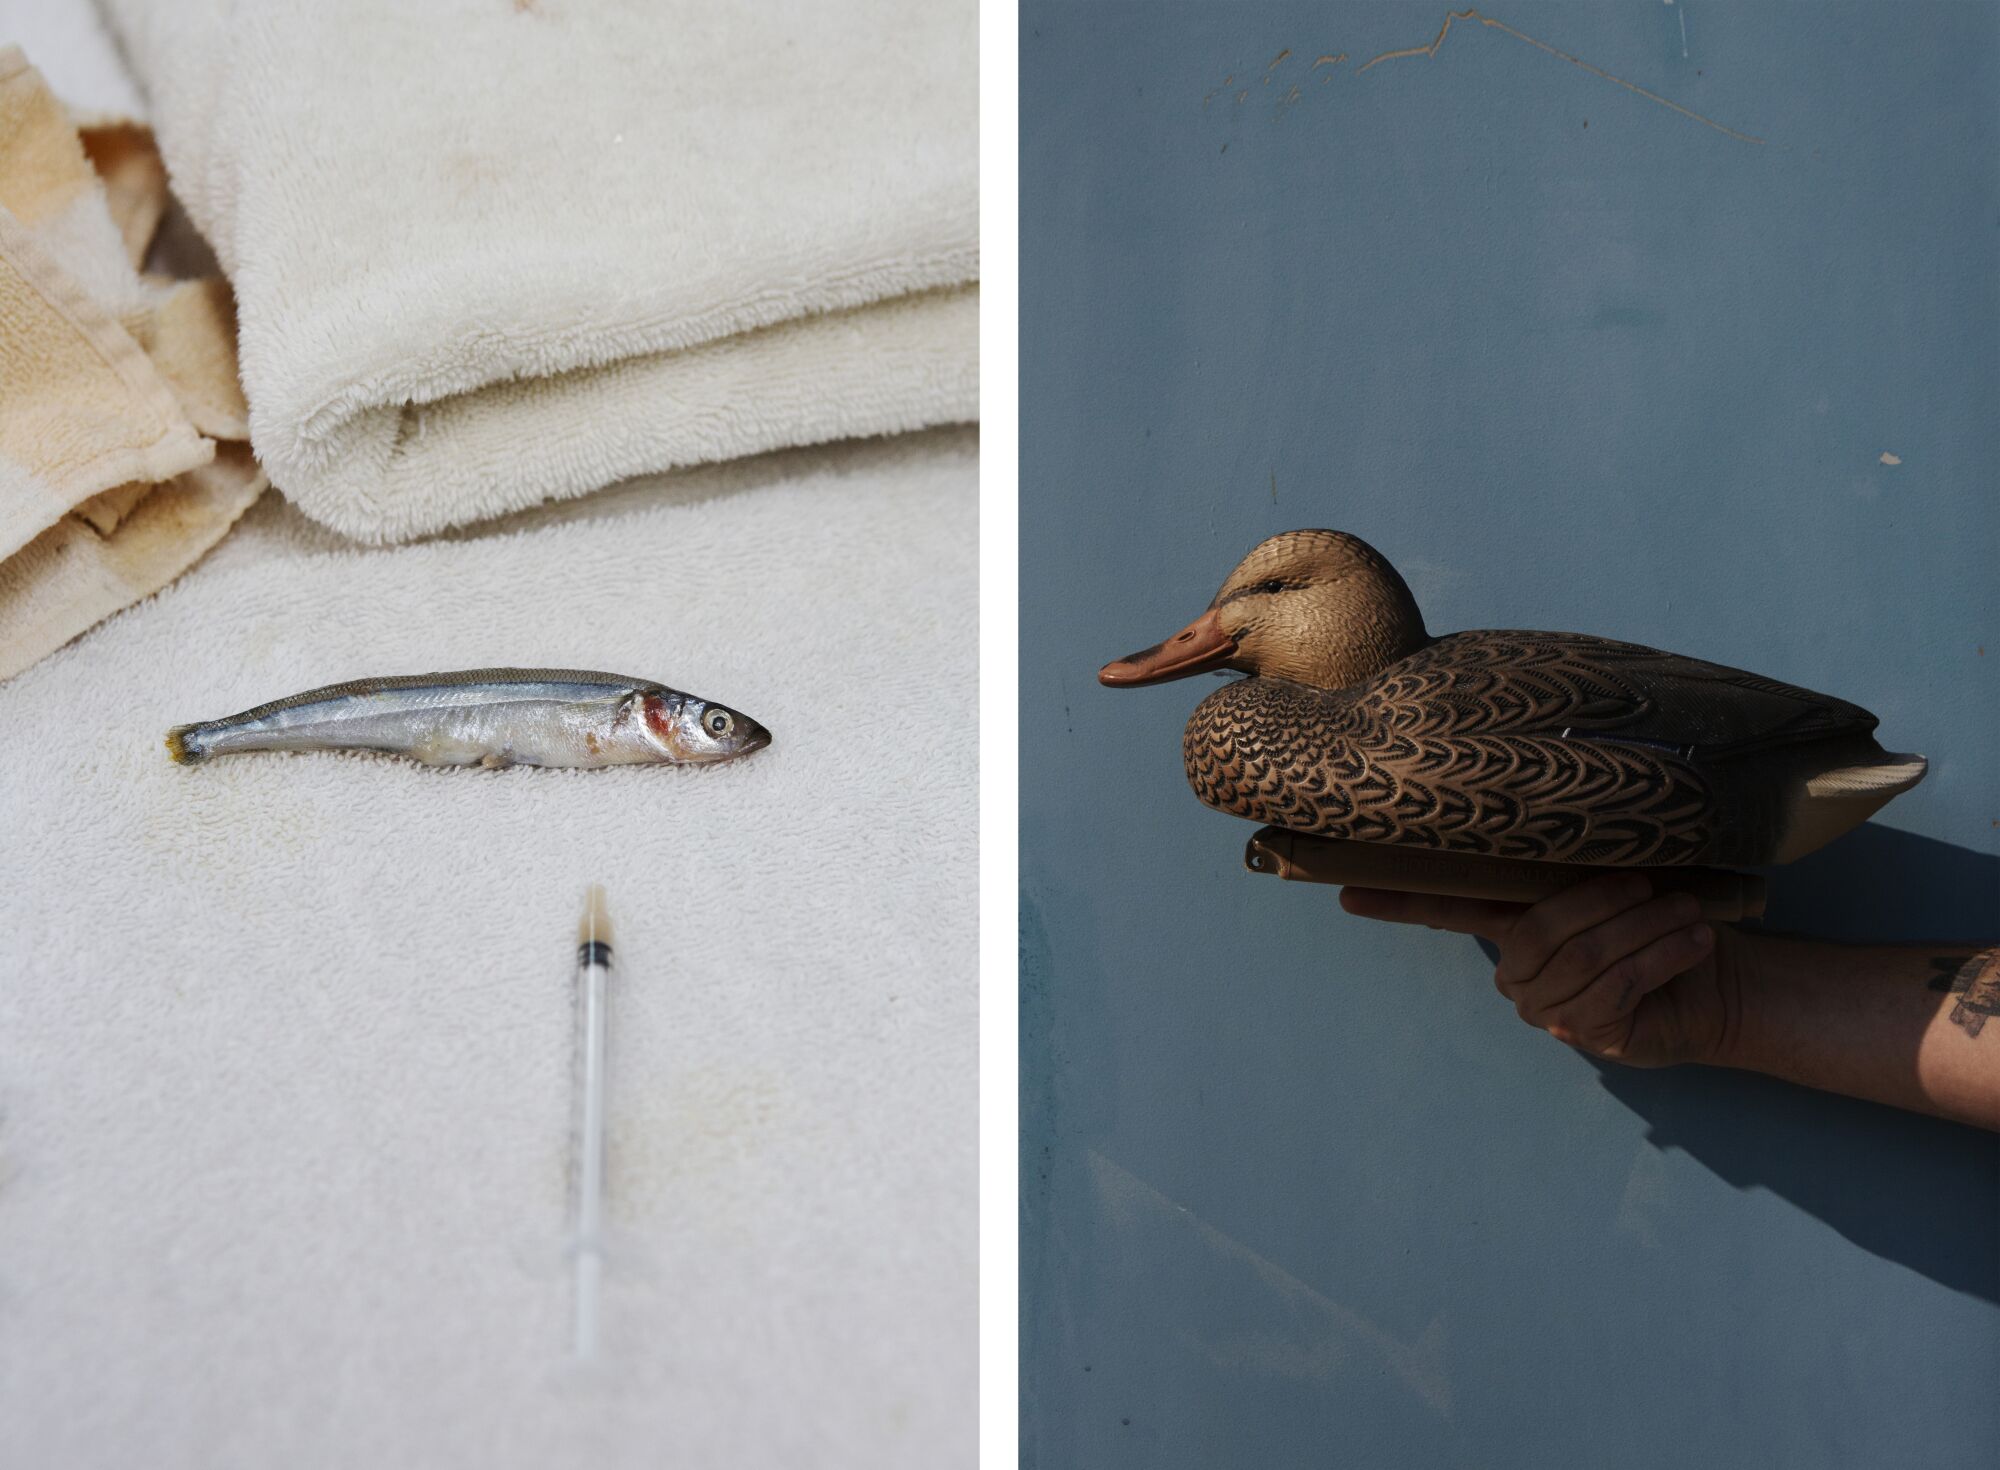 LEFT: A Peruvian smelt and a syringe containing medicine. RIGHT: Decoy birds to comfort the birds in refuge.